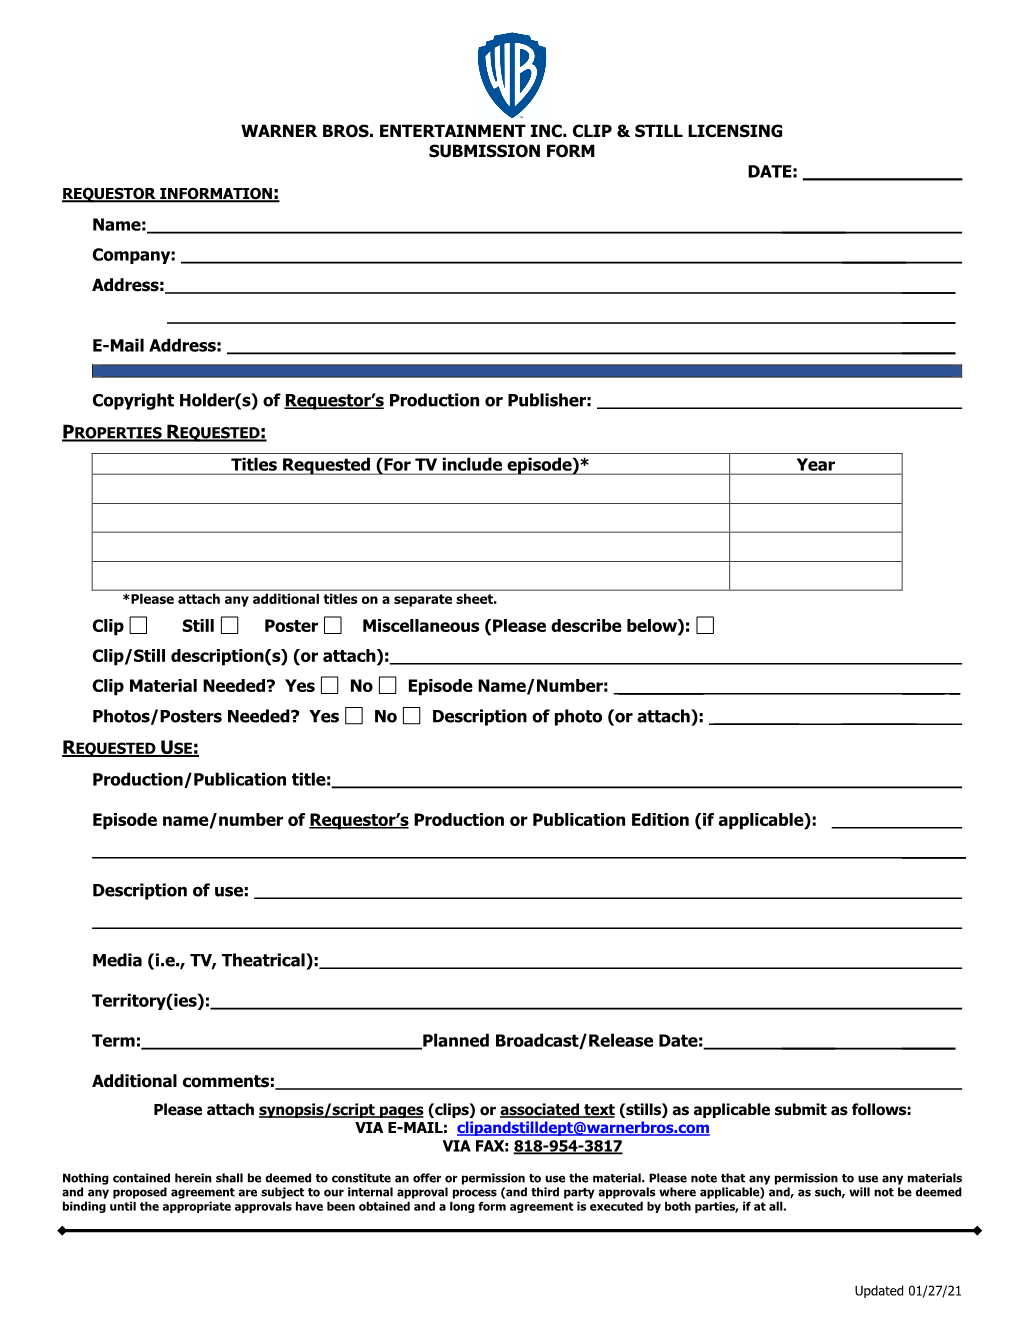 Warner Bros. Entertainment Inc. Clip & Still Licensing Submission Form Date